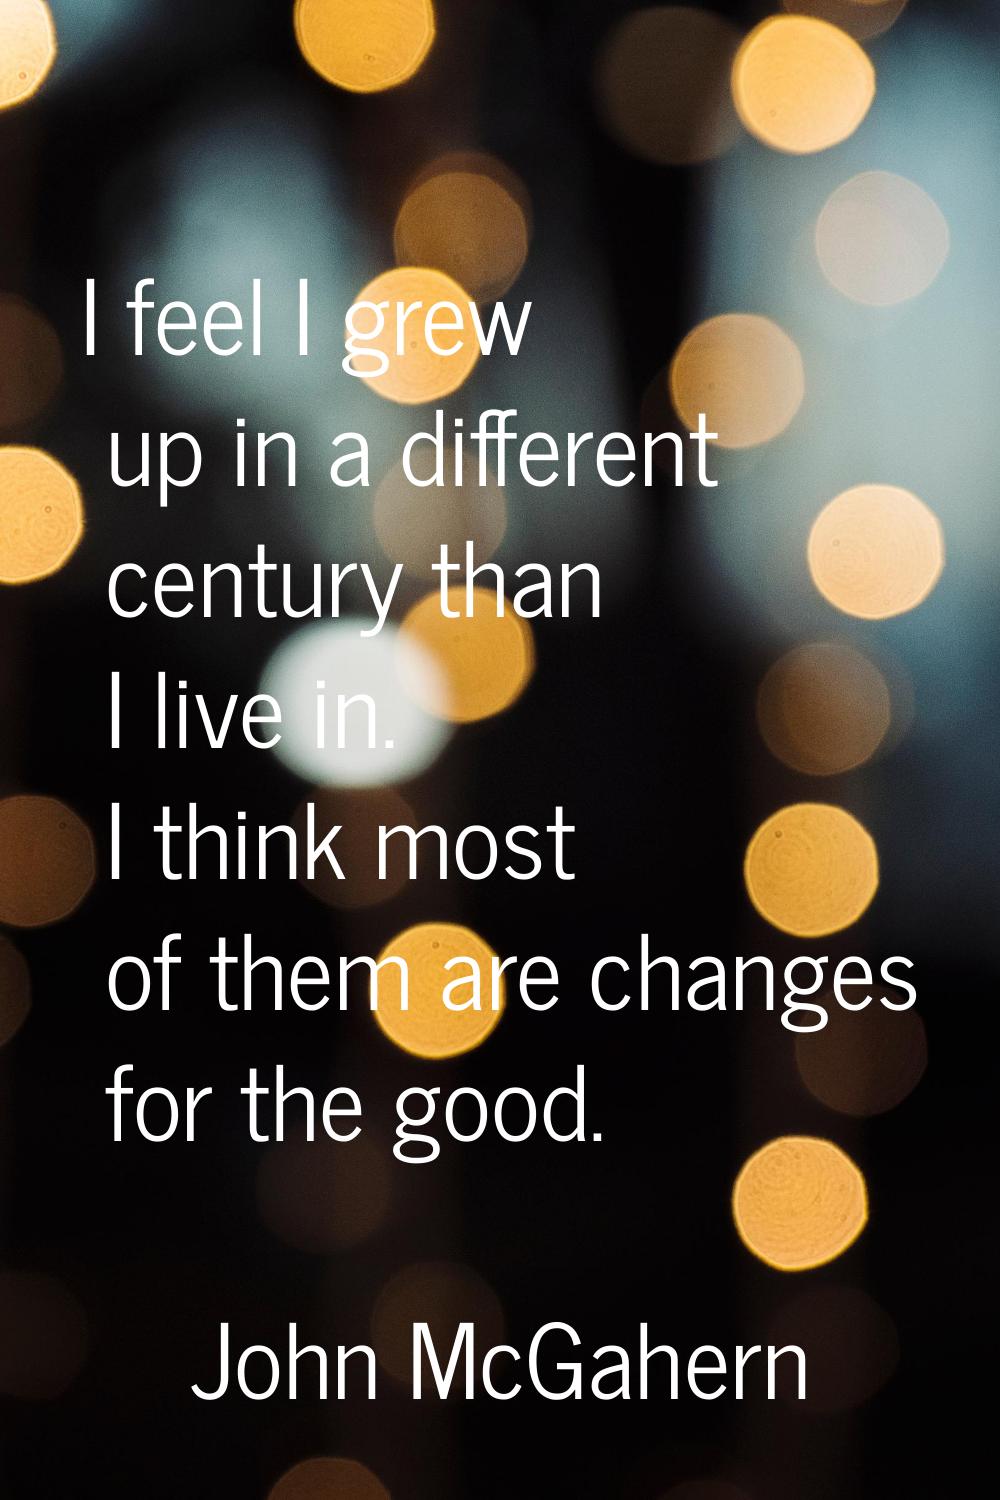 I feel I grew up in a different century than I live in. I think most of them are changes for the go